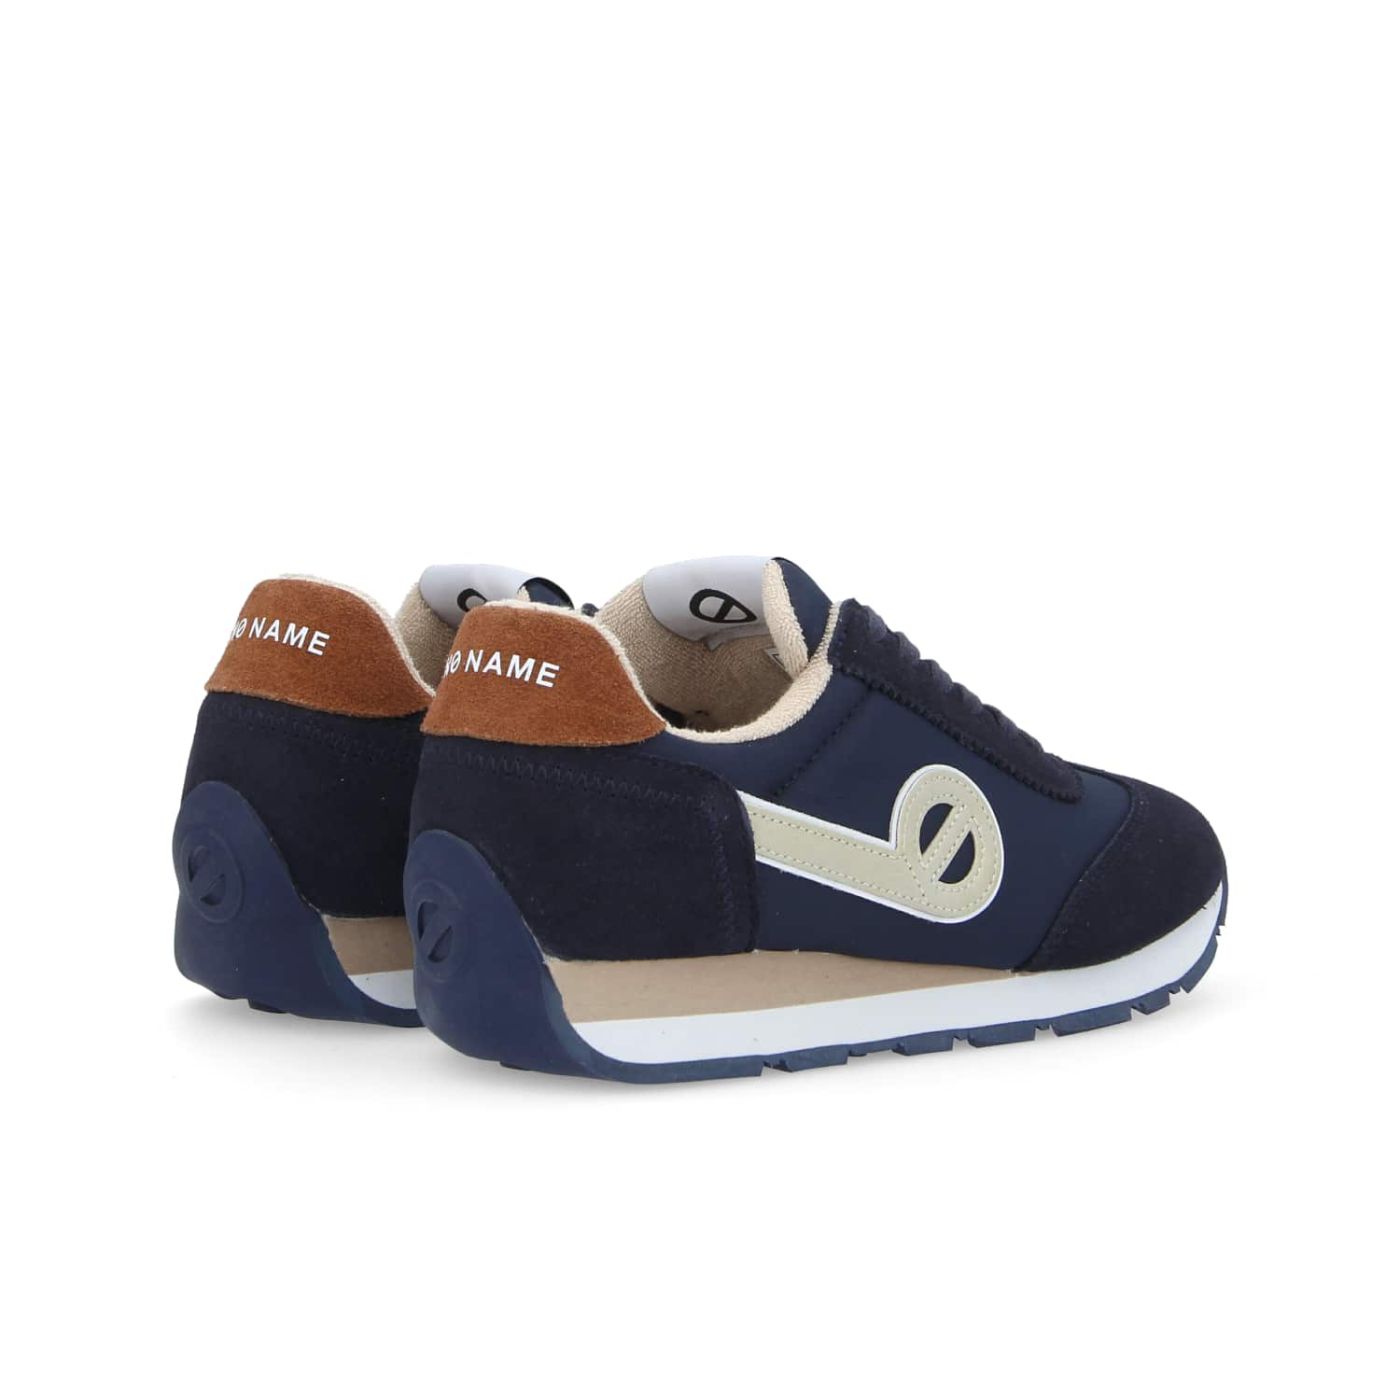 CITY RUN JOGGER - SUEDE/SQUARE - NAVY